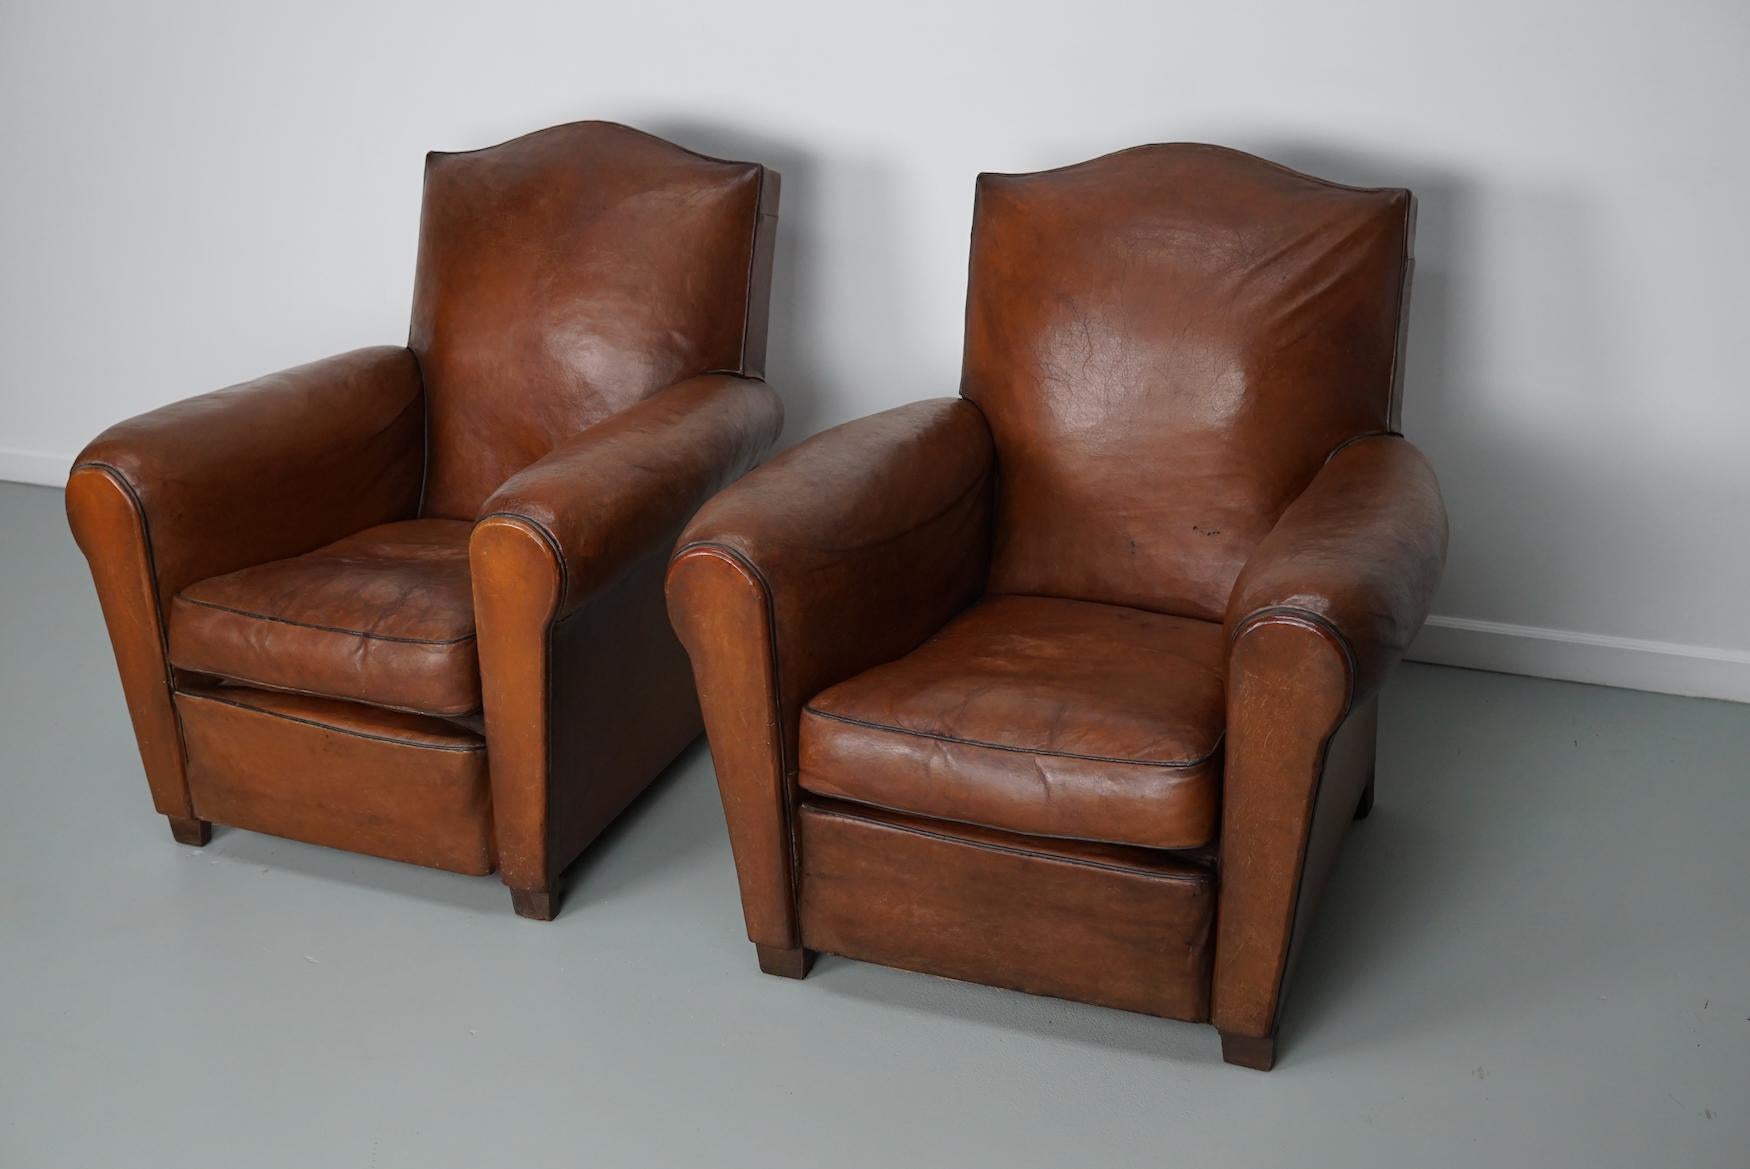 These club chairs were designed and produced in France during the 1940s. The chairs are made from cognac leather held together with metal pins and mounted on wooden legs.